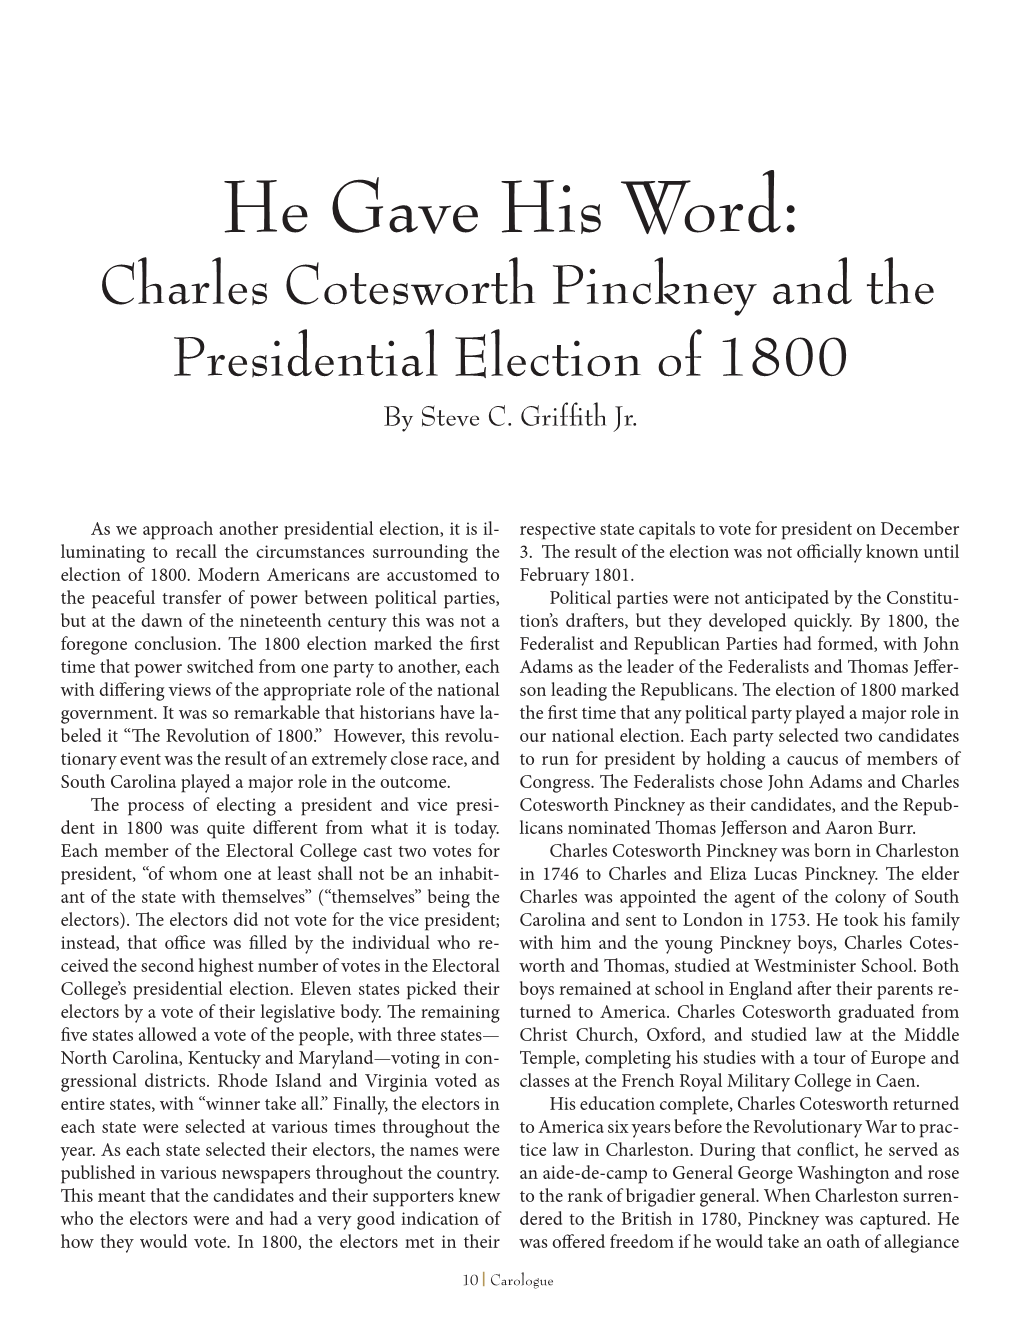 He Gave His Word: Charles Cotesworth Pinckney and the Presidential Election of 1800 by Steve C